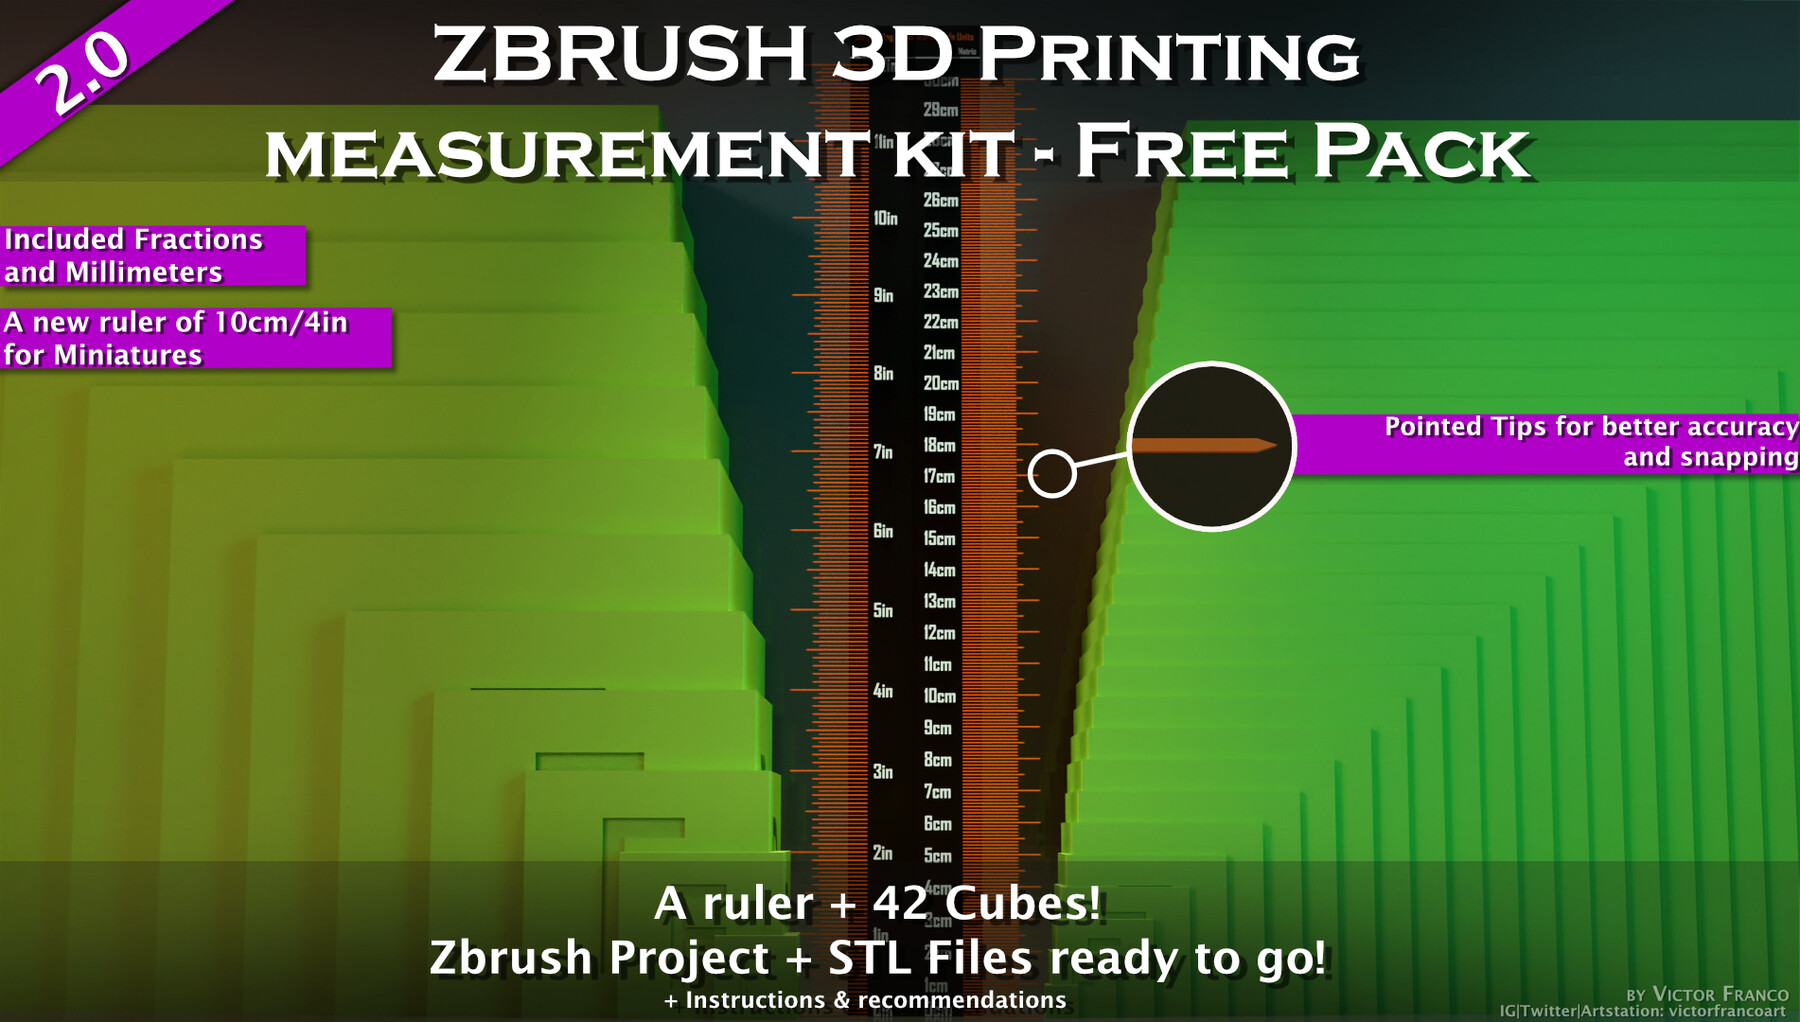 how does zbrush measure reral life units for 3d printing